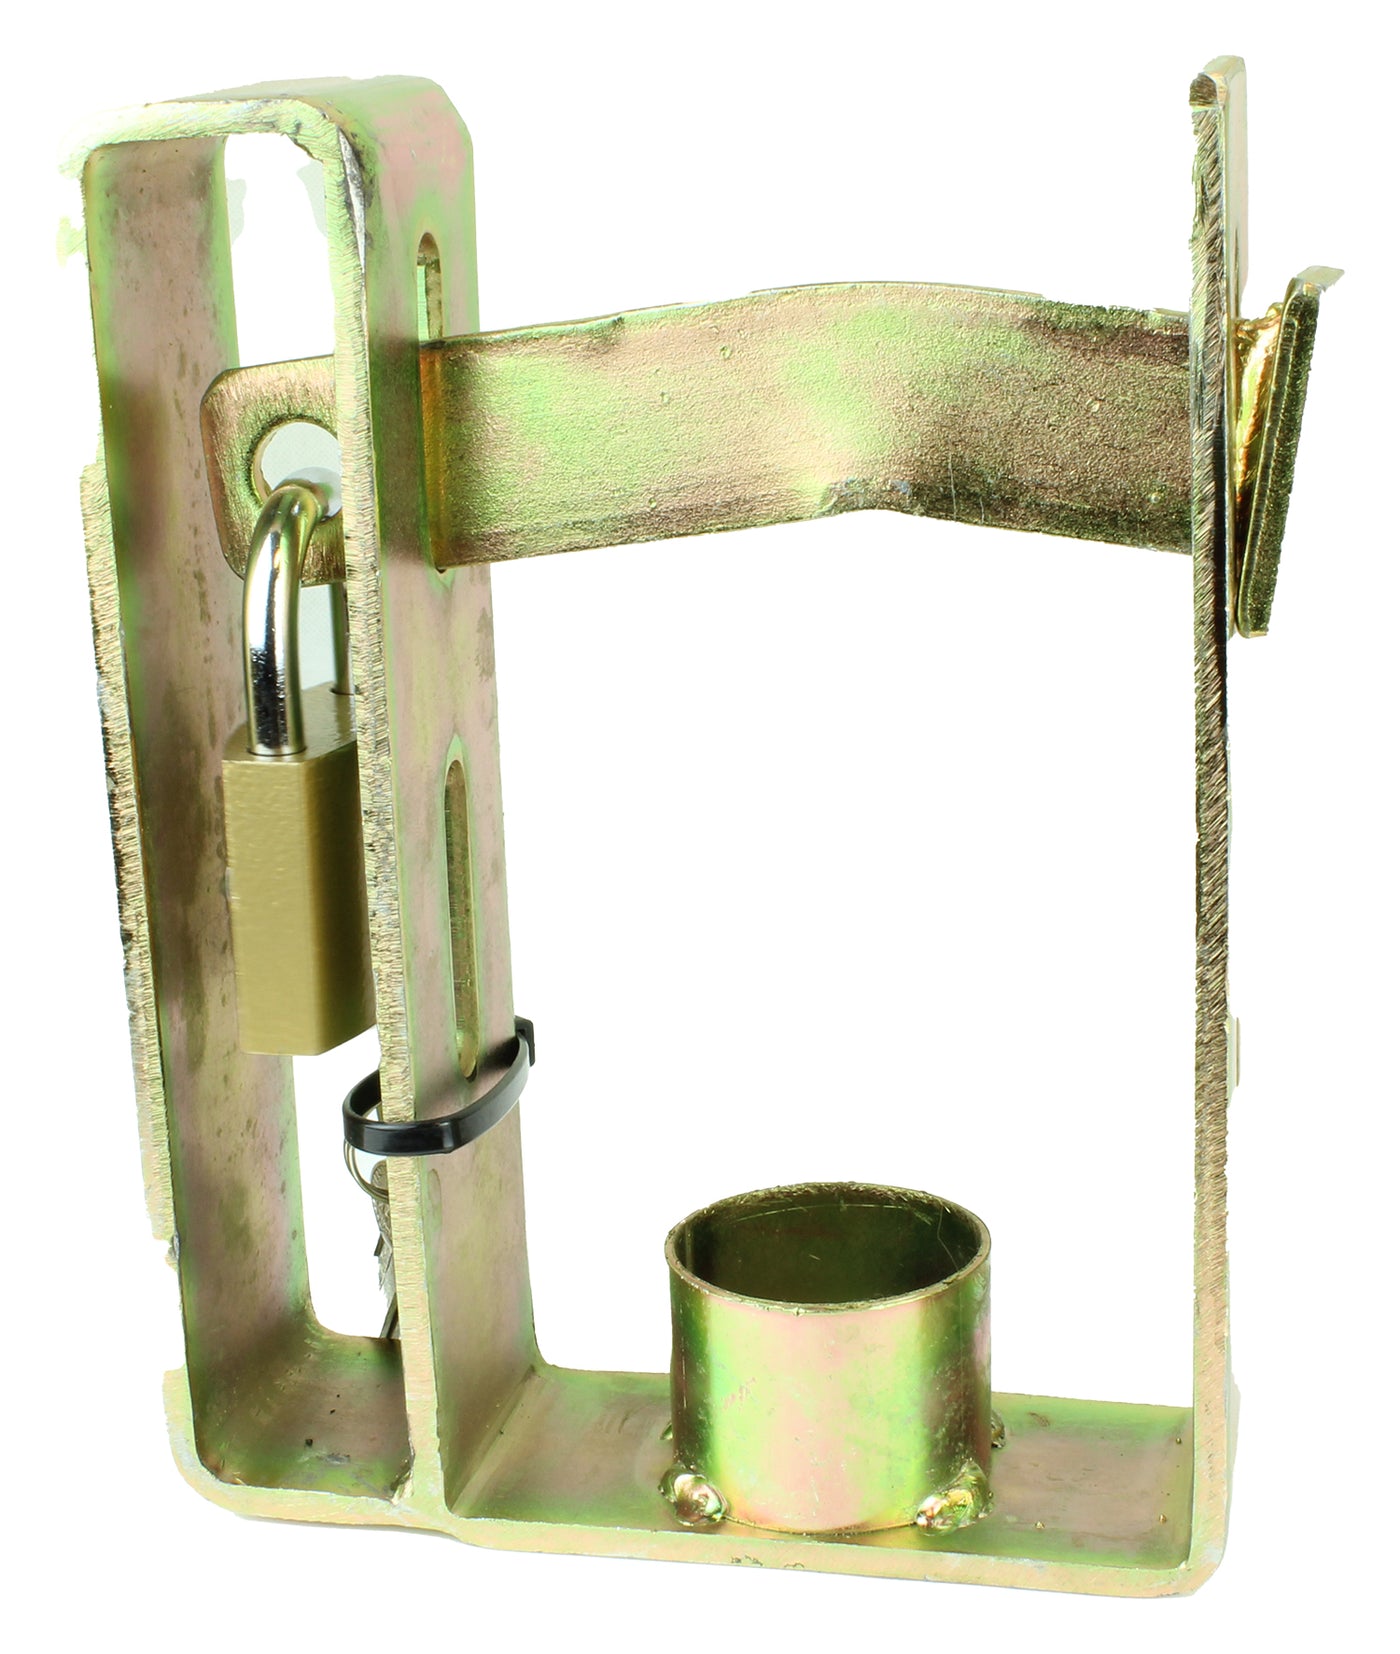 Trailer Hitch Coupling Lock Heavy Duty 2 Stage Universal Security + Padlock